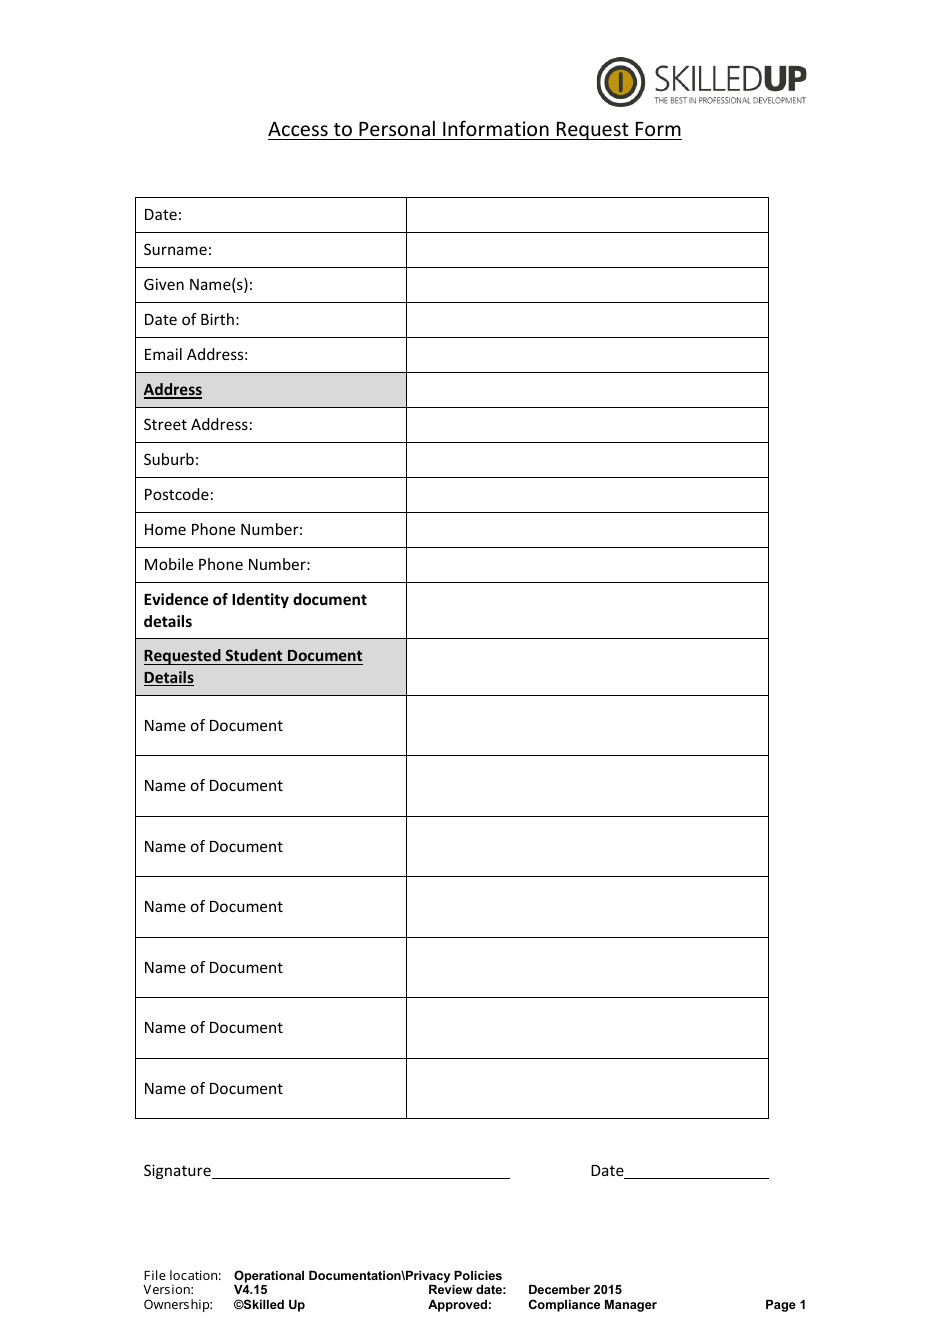 Access to Personal Information Request Form - Skilledup, Page 1